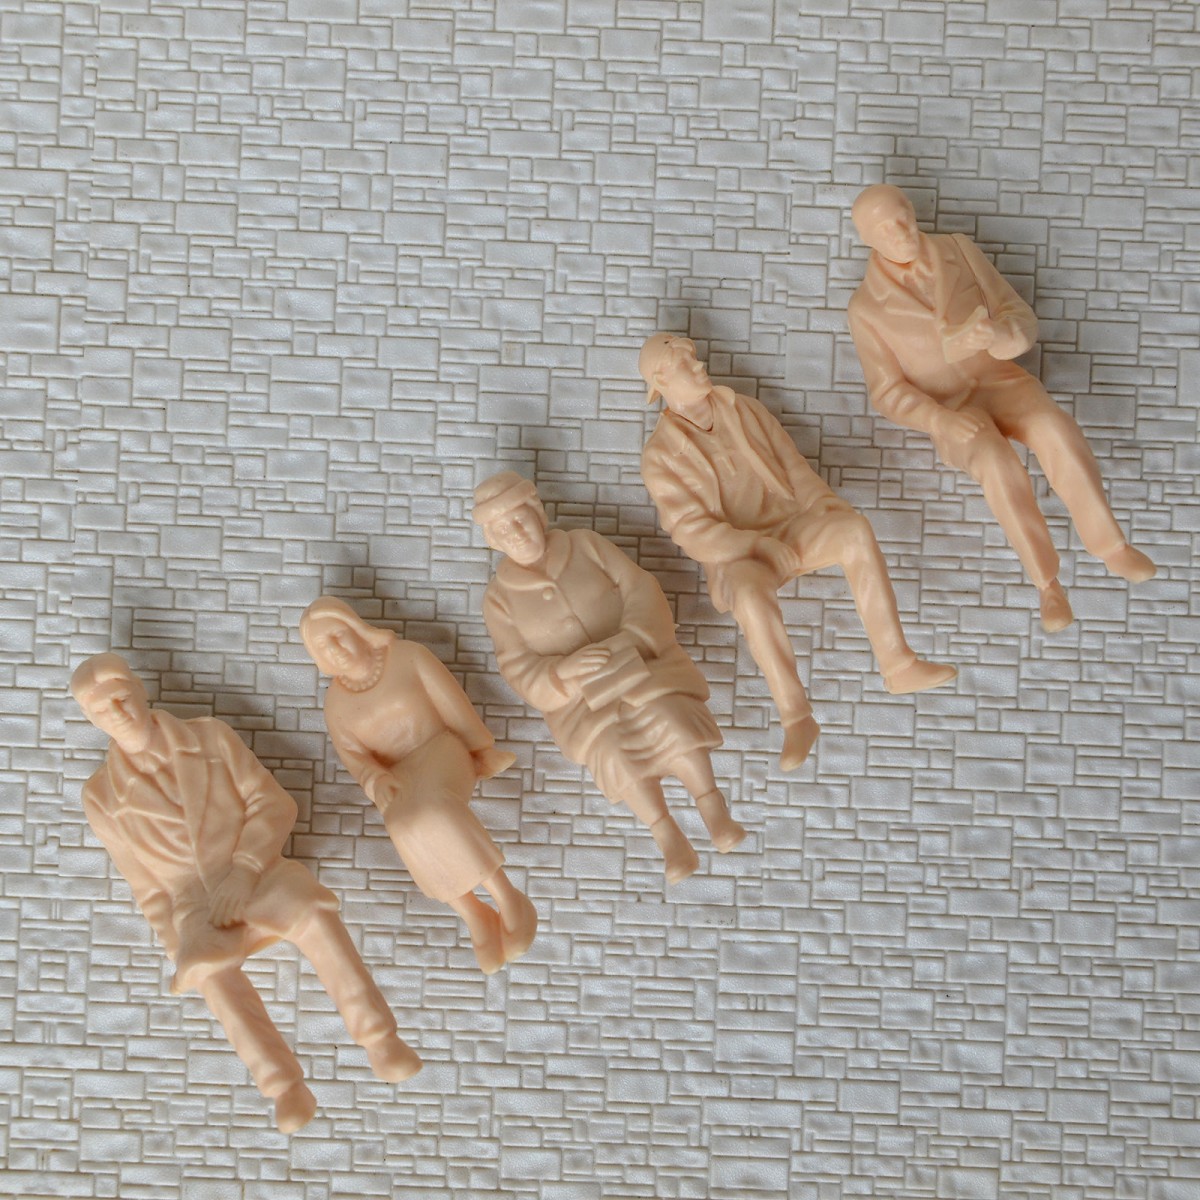 5 x G Scale 1:22.5 unPainted Figures all seated 5 different poses People (WeHonest)